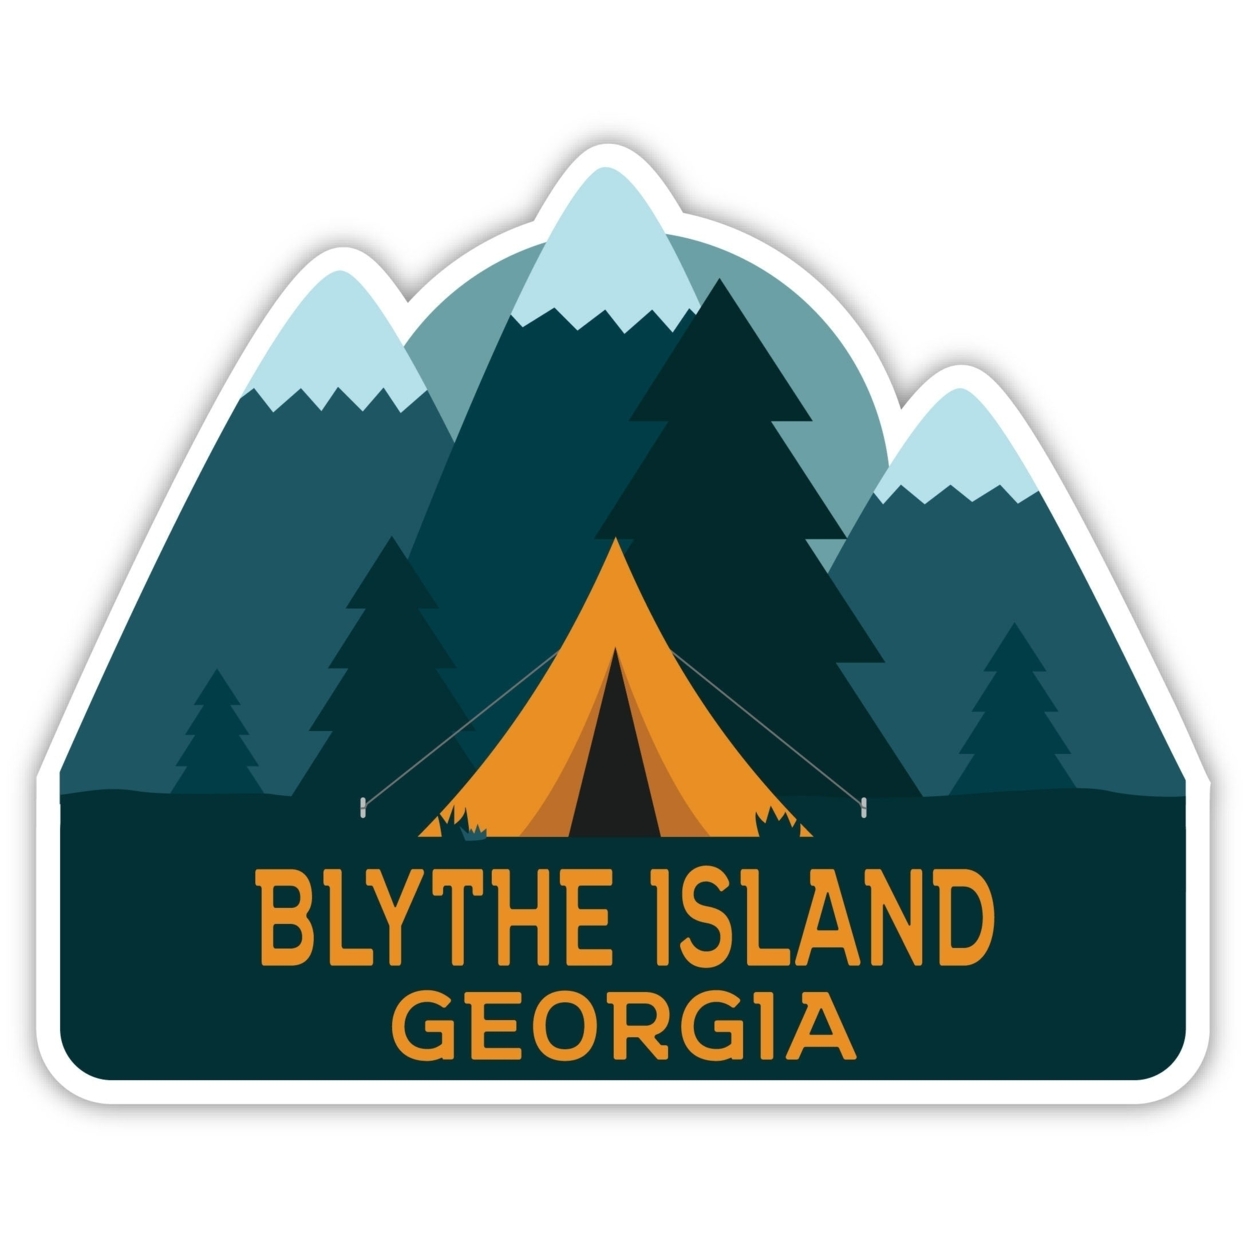 Blythe Island Georgia Souvenir Decorative Stickers (Choose Theme And Size) - 4-Pack, 10-Inch, Great Outdoors